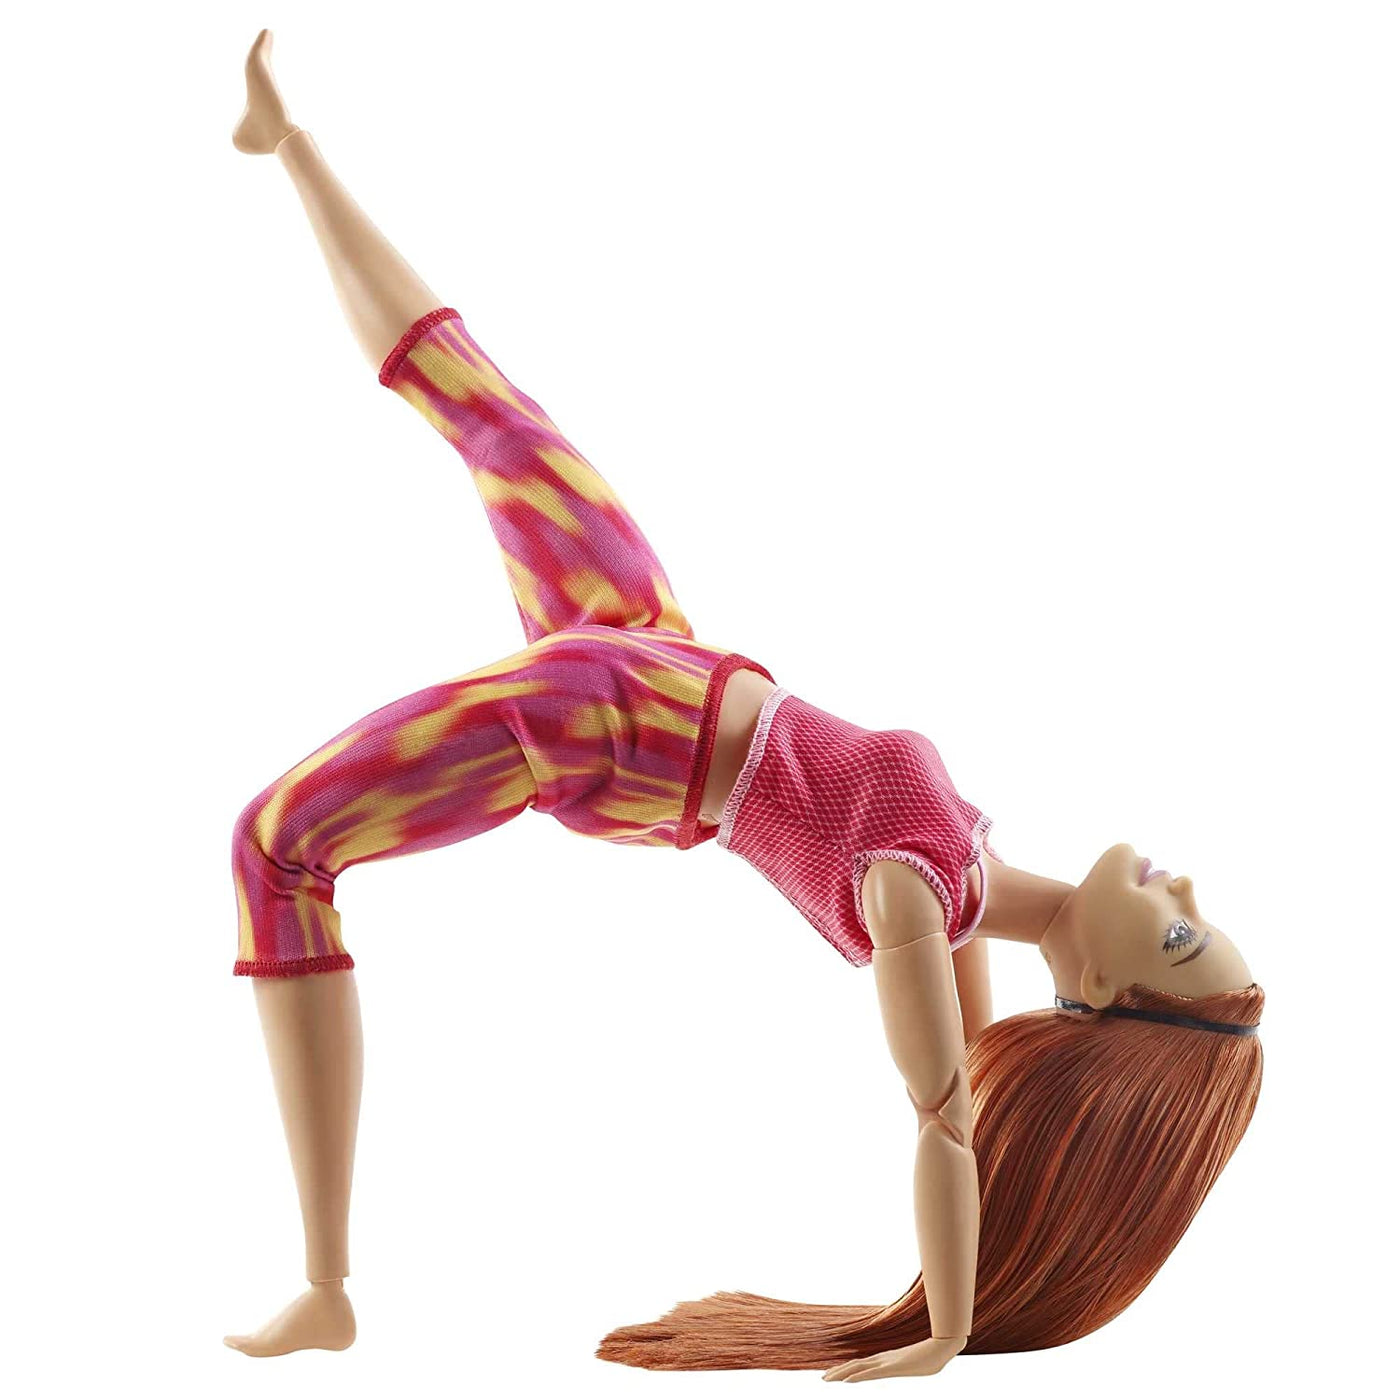 Barbie Made To Move Doll - 22 Flexible Joints | Barbie